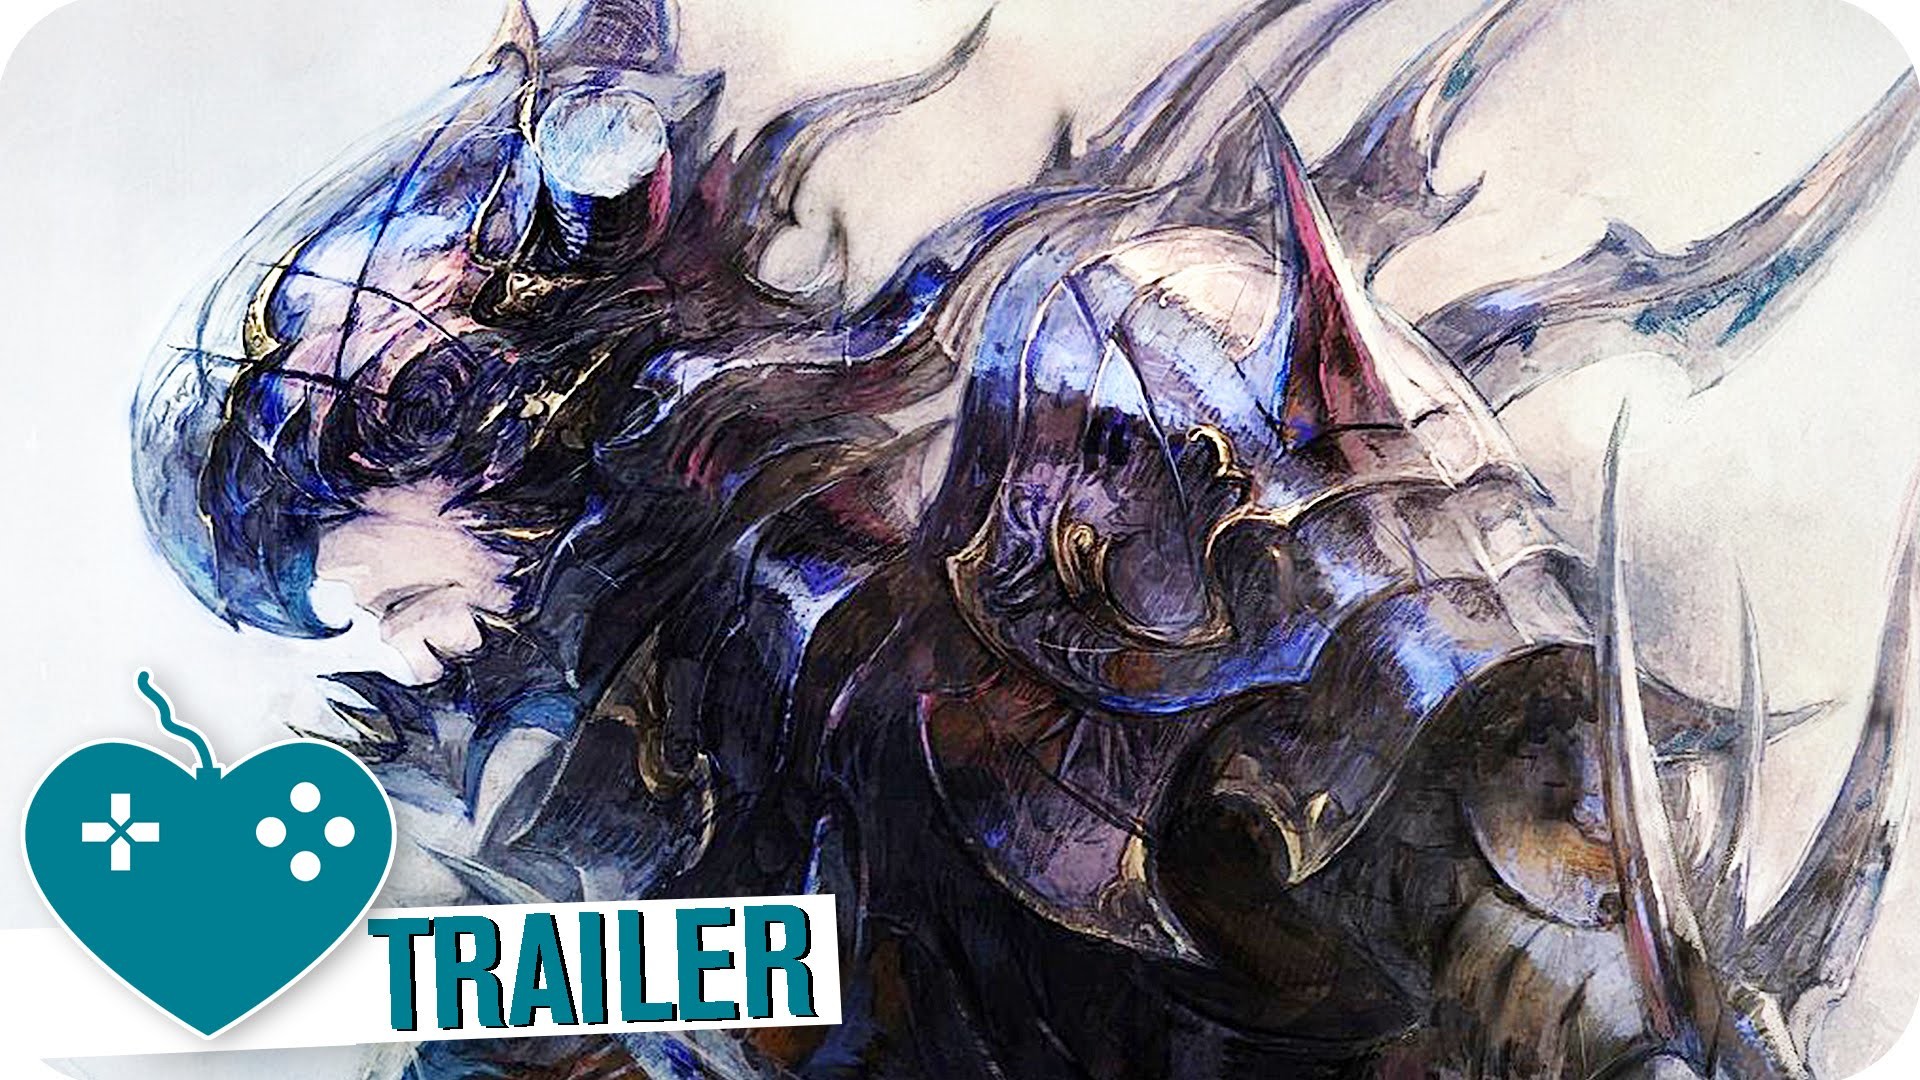 1920x1080 FINAL FANTASY XIV: HEAVENSWARD Patch 3.3 Revenge of the Horde Trailer  (2016) PS4, PS3, PC - YouTube